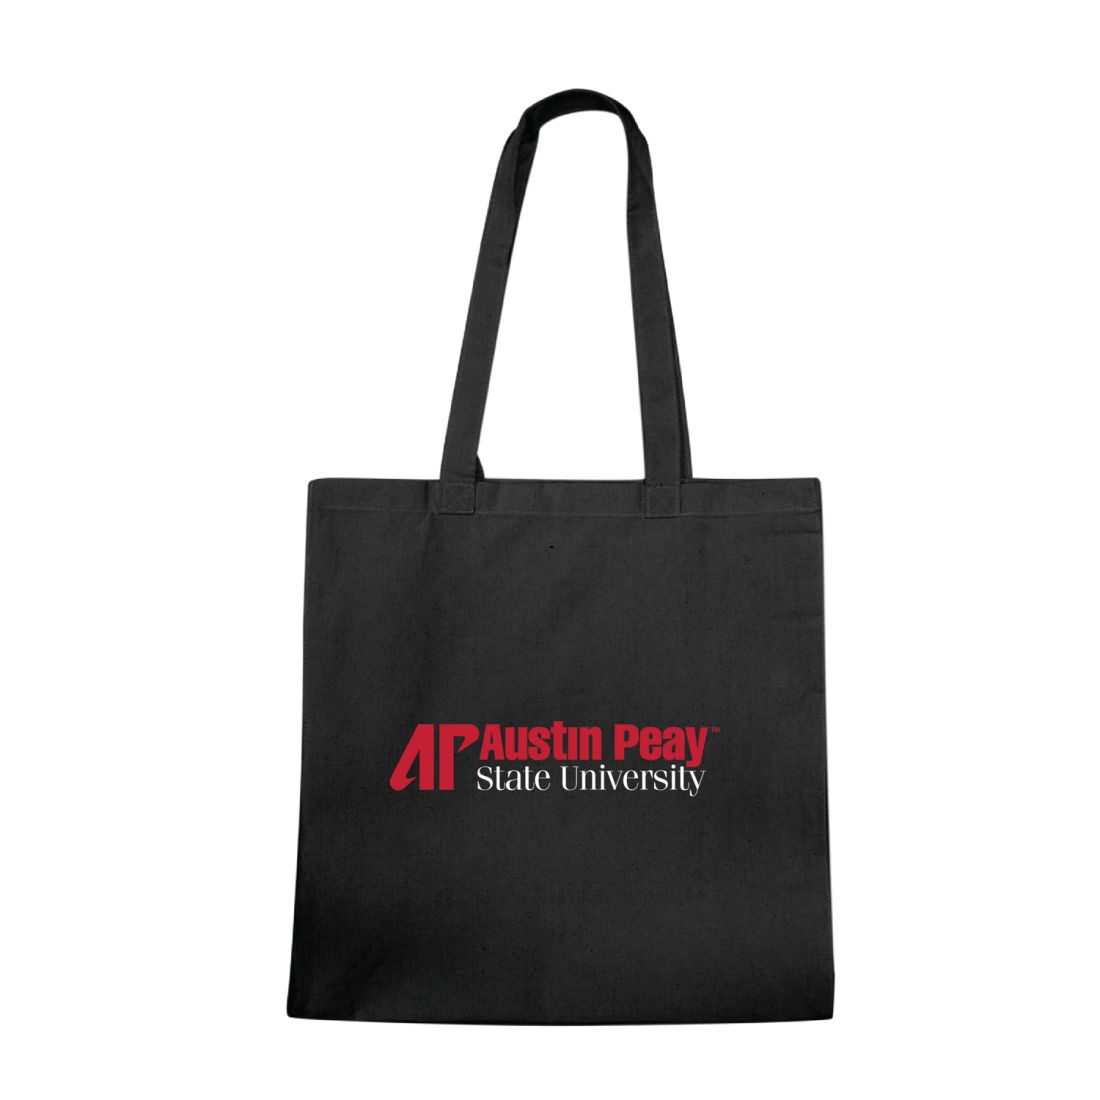 APSU Austin Peay State University Governors Institutional Tote Bag